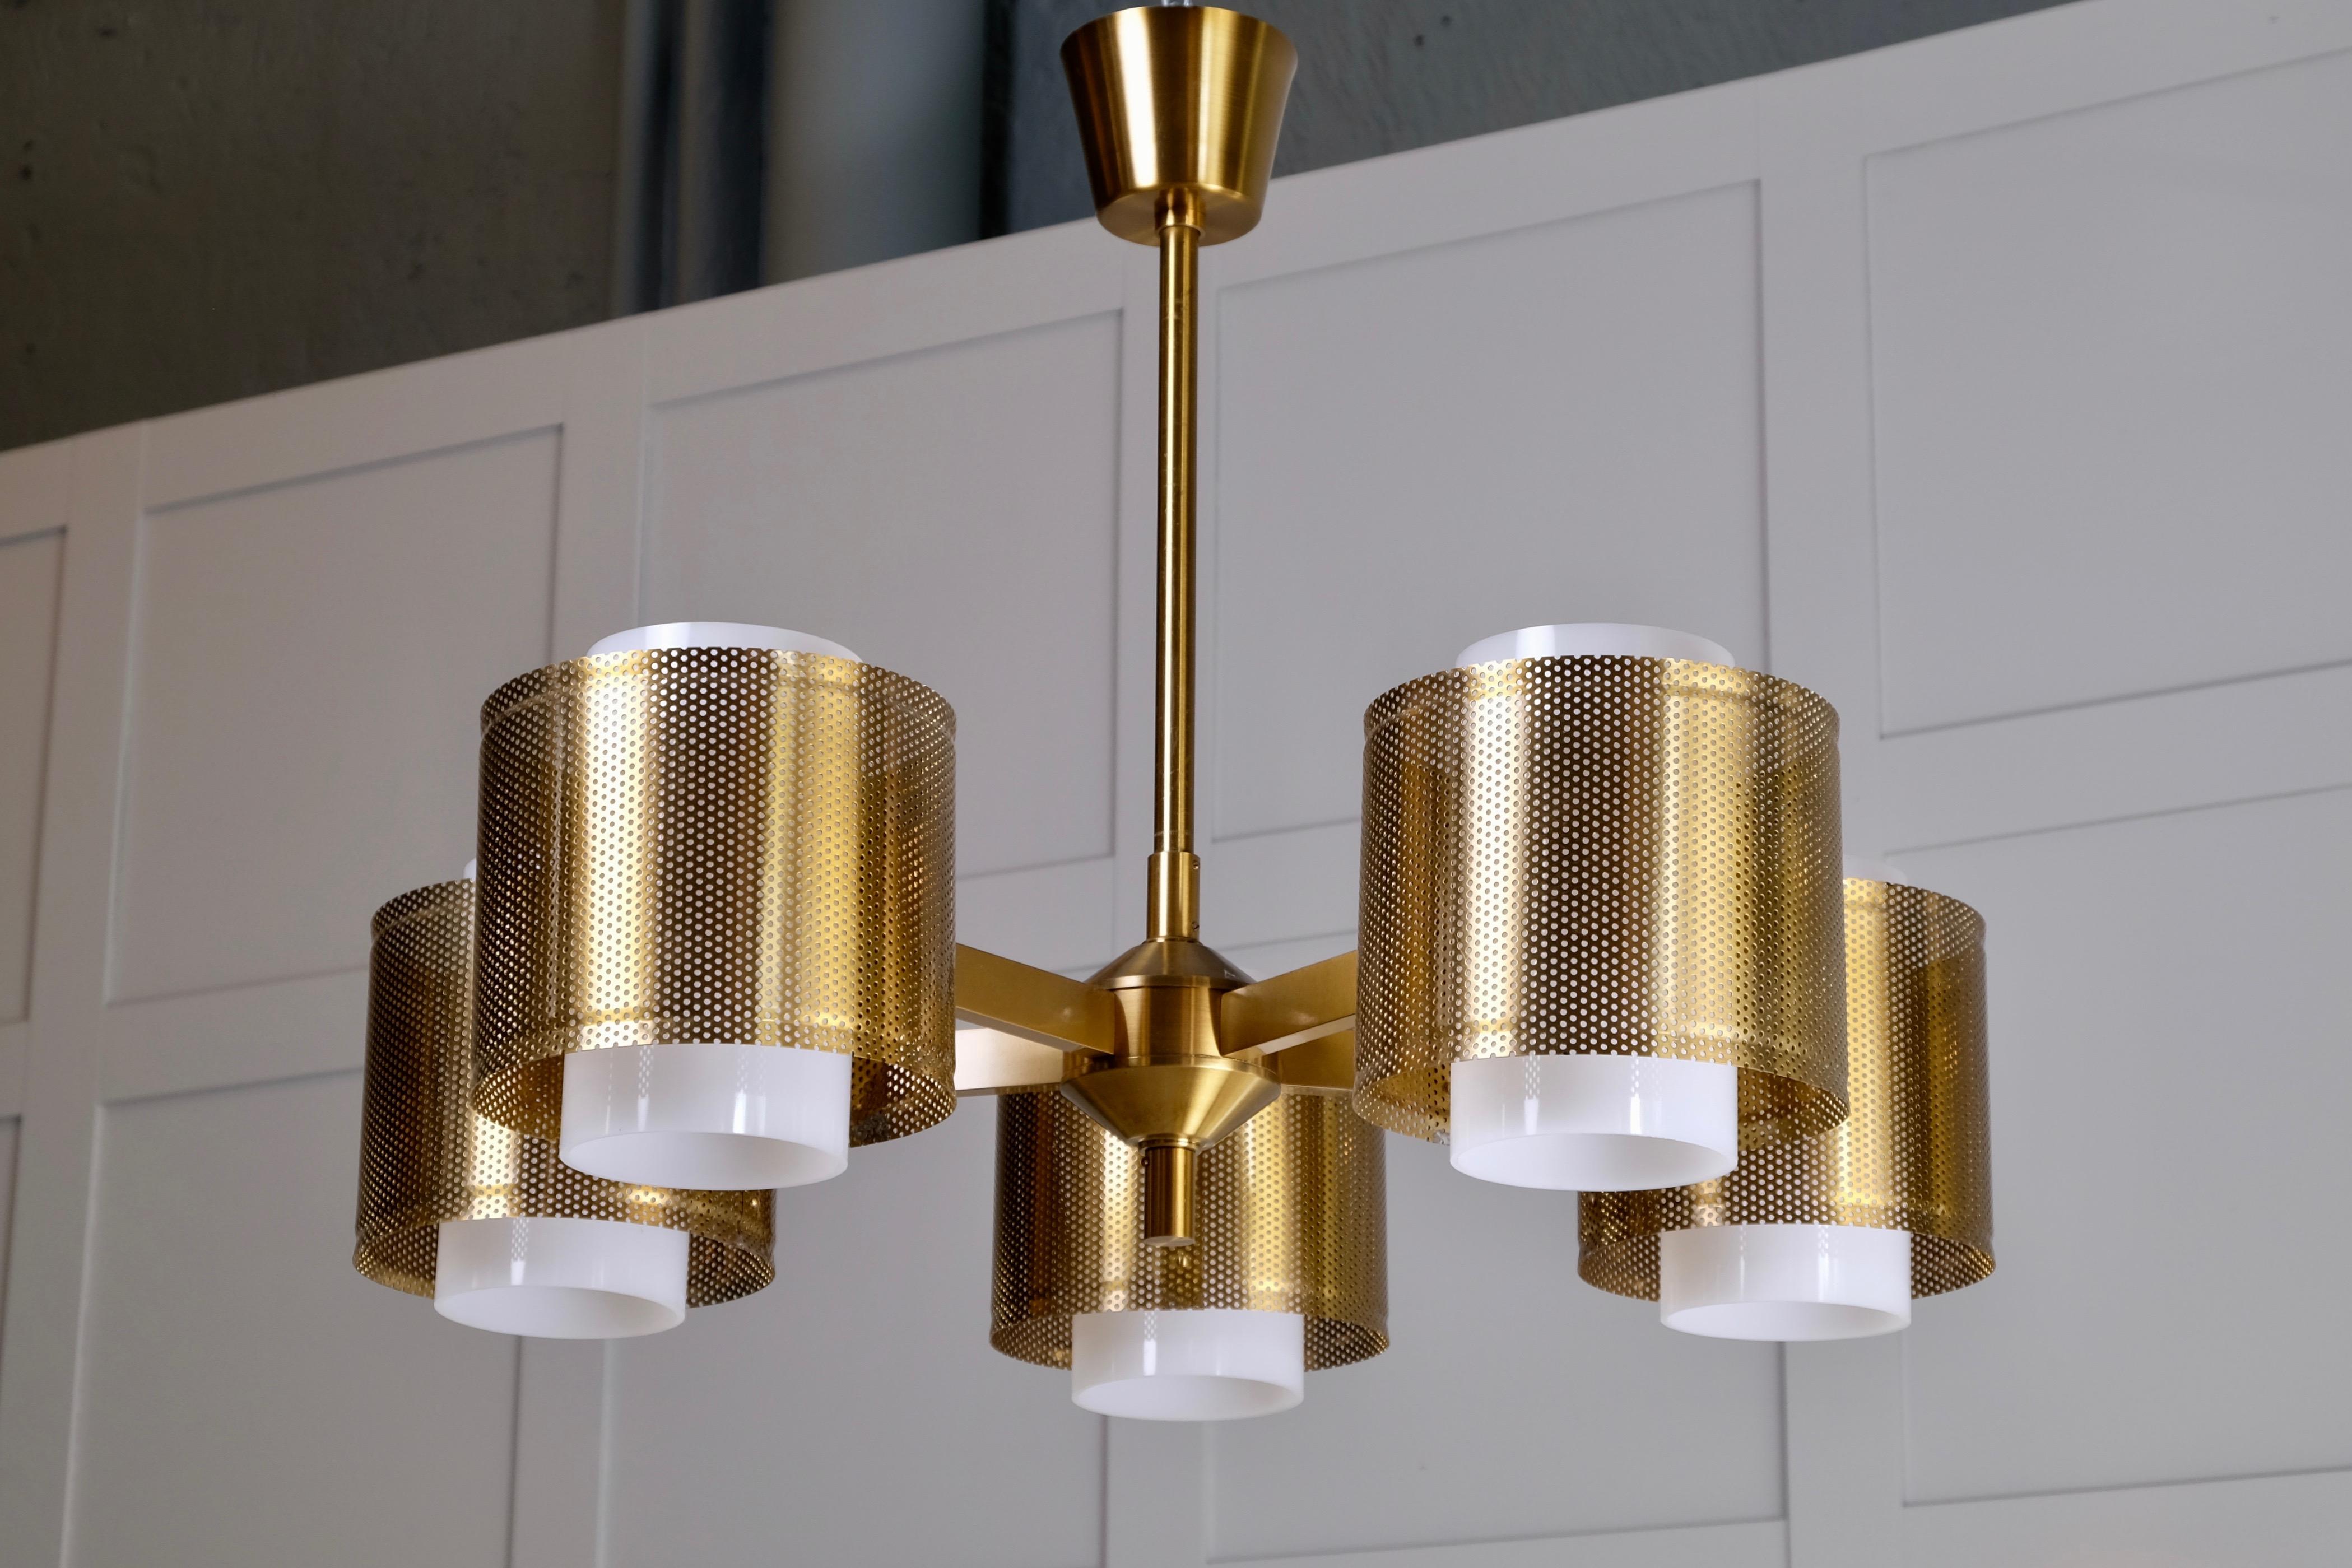 Brass Ceiling Lamps by Holger Johansson, Sweden, 1960s For Sale 4